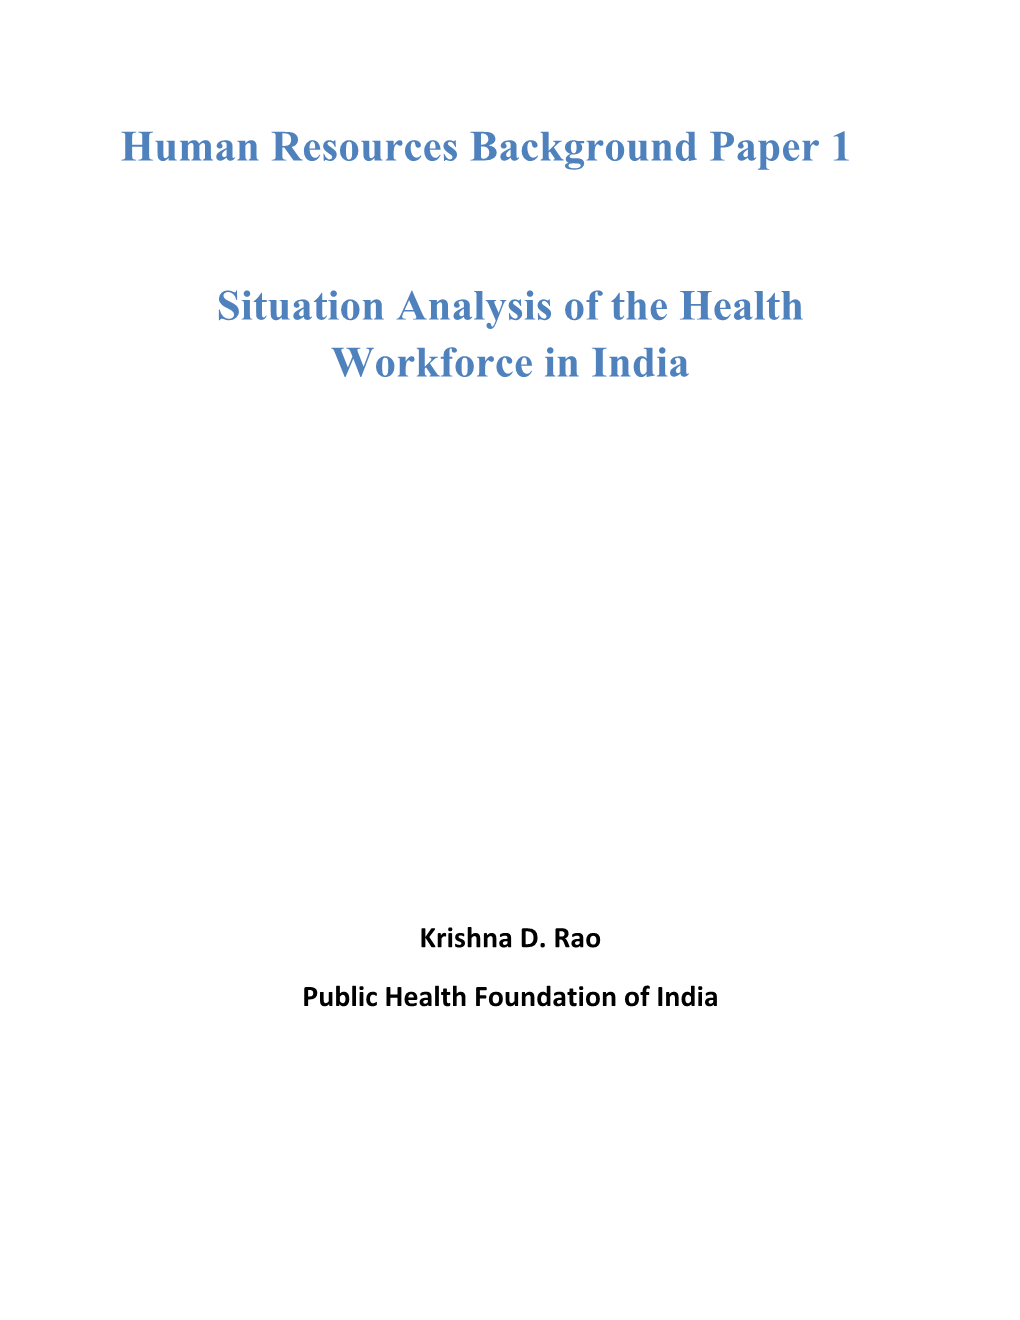 Human Resources Background Paper 1 Situation Analysis of the Health